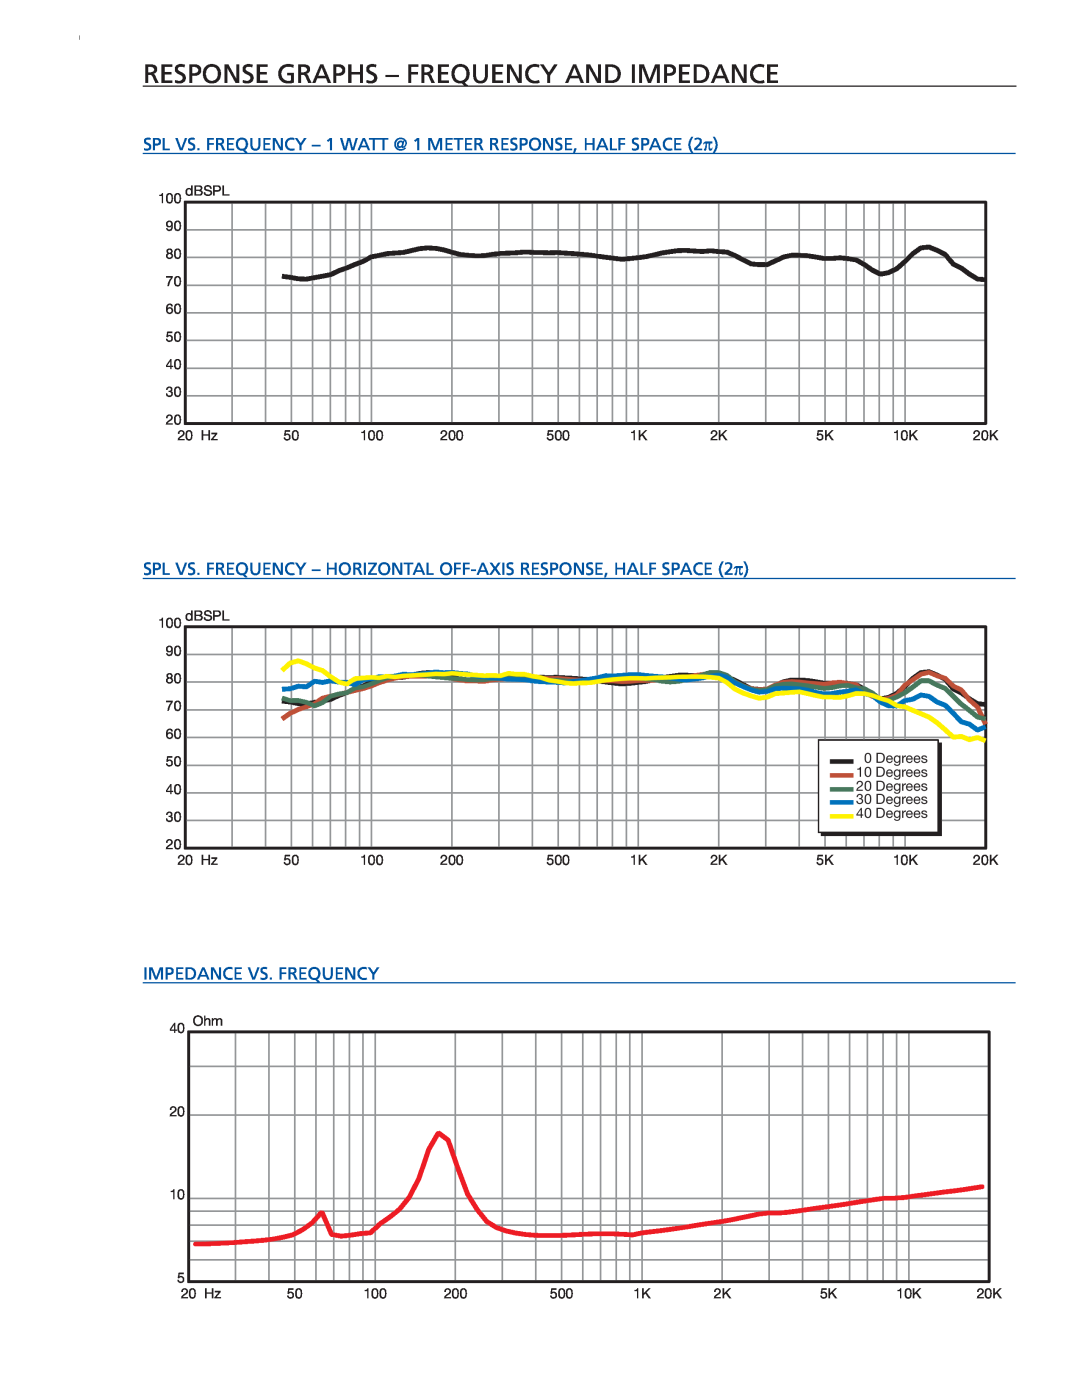 Extron electronic SI 3CT LP warranty response graphs - frequency and impedance 